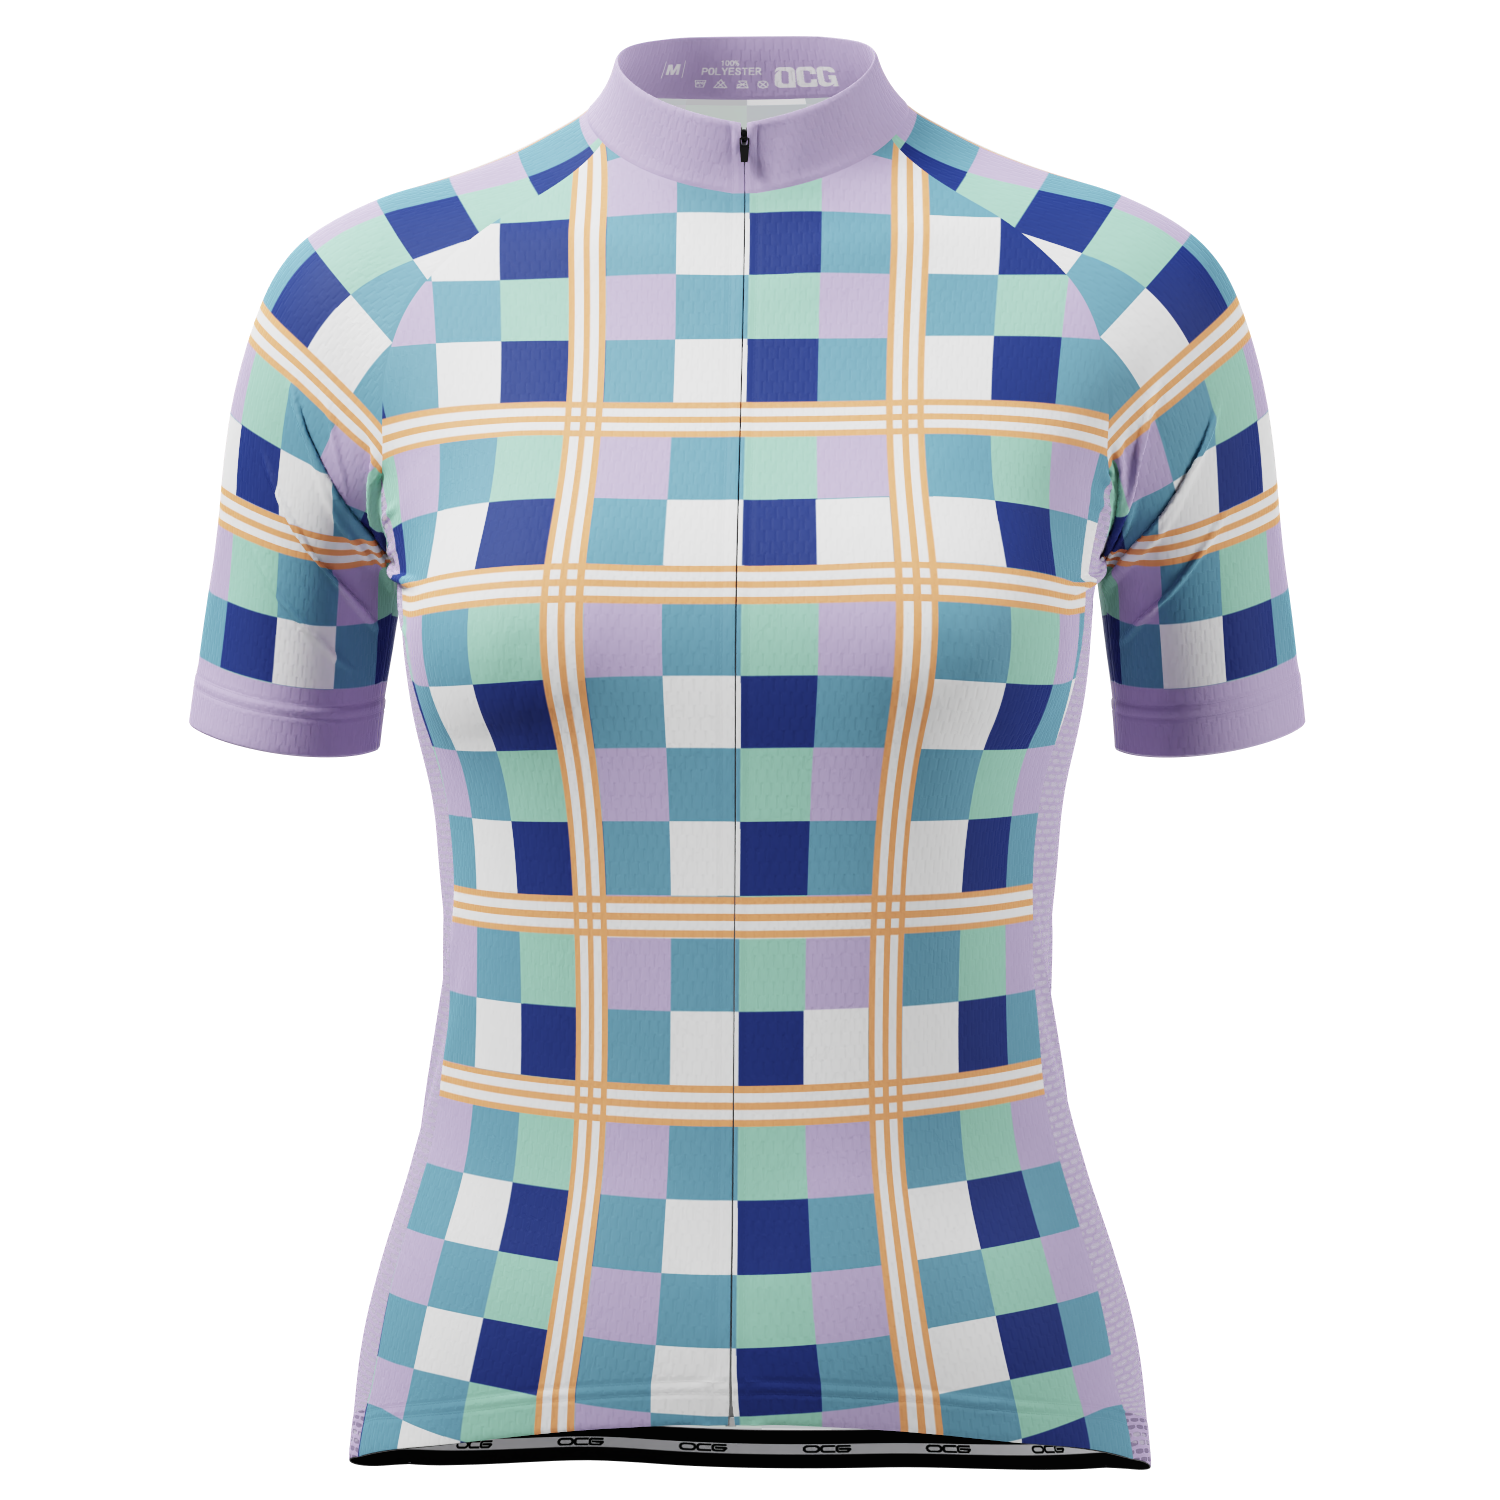 Women's Checkered Plaid Short Sleeve Cycling Jersey